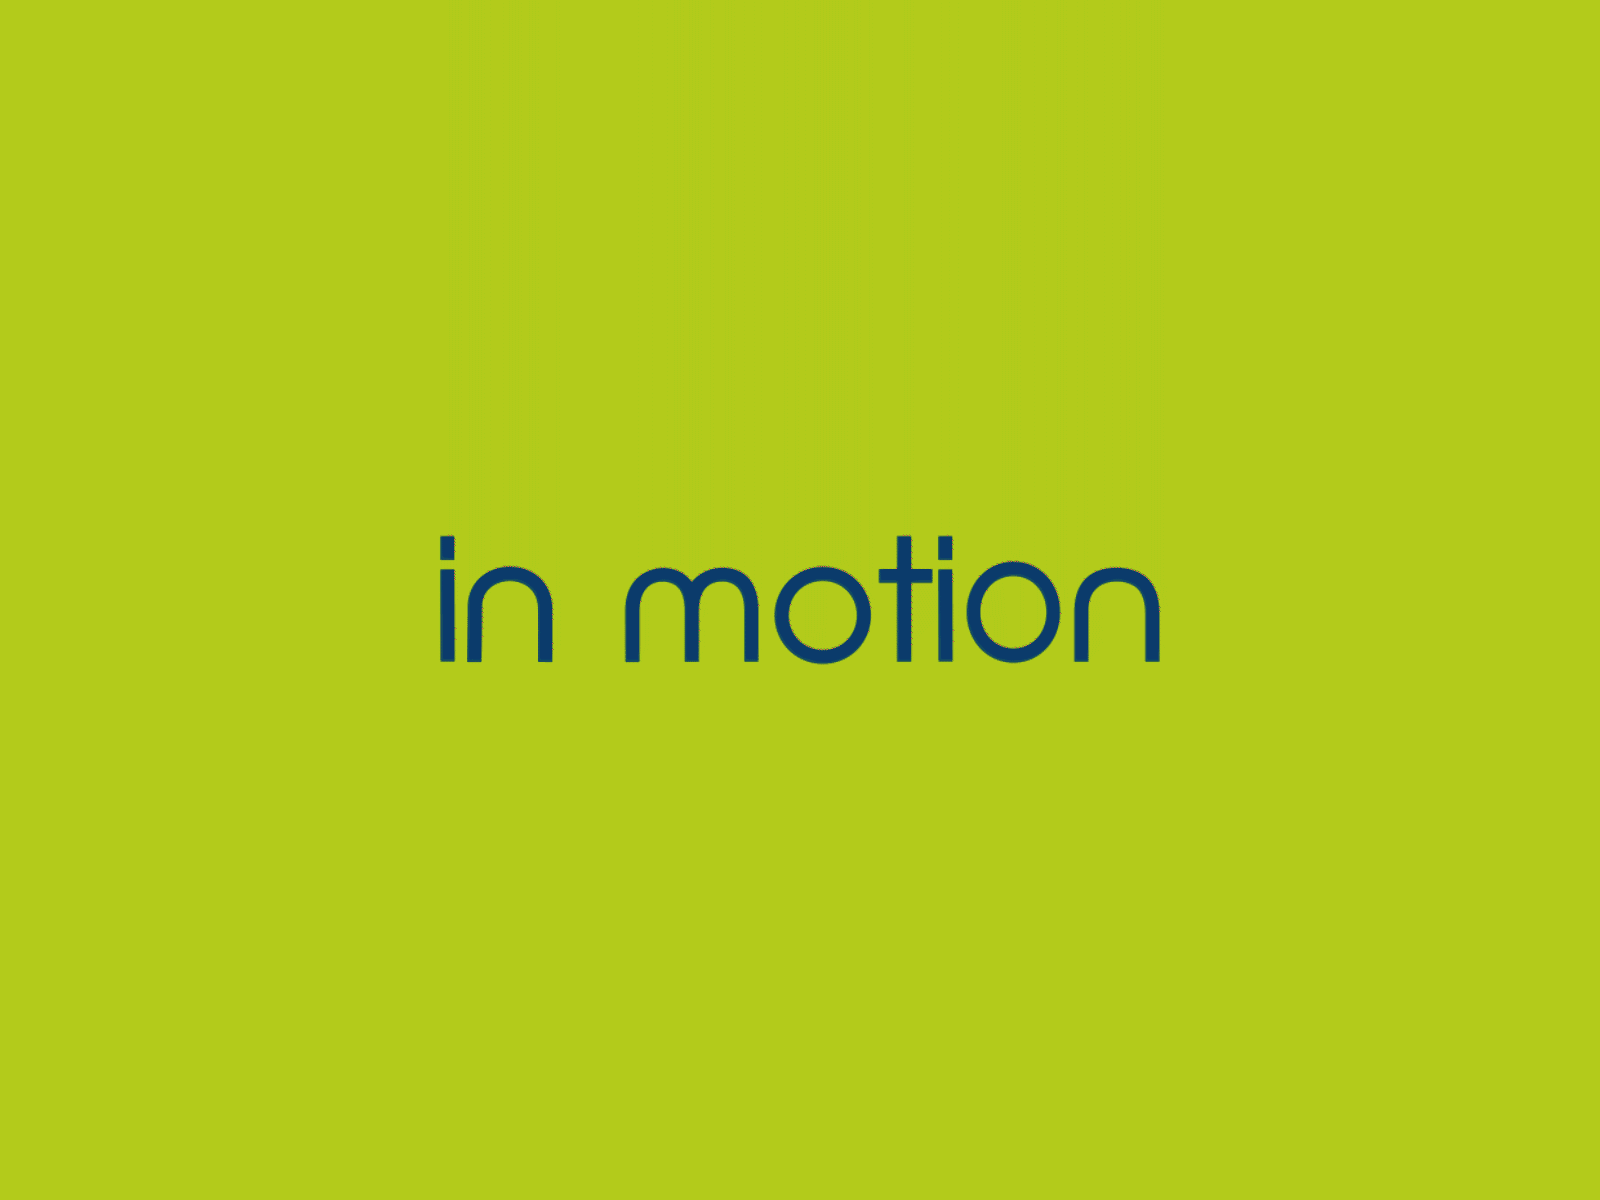 In motion 2danimation animation kinectic typography logo motion design motiongraphics